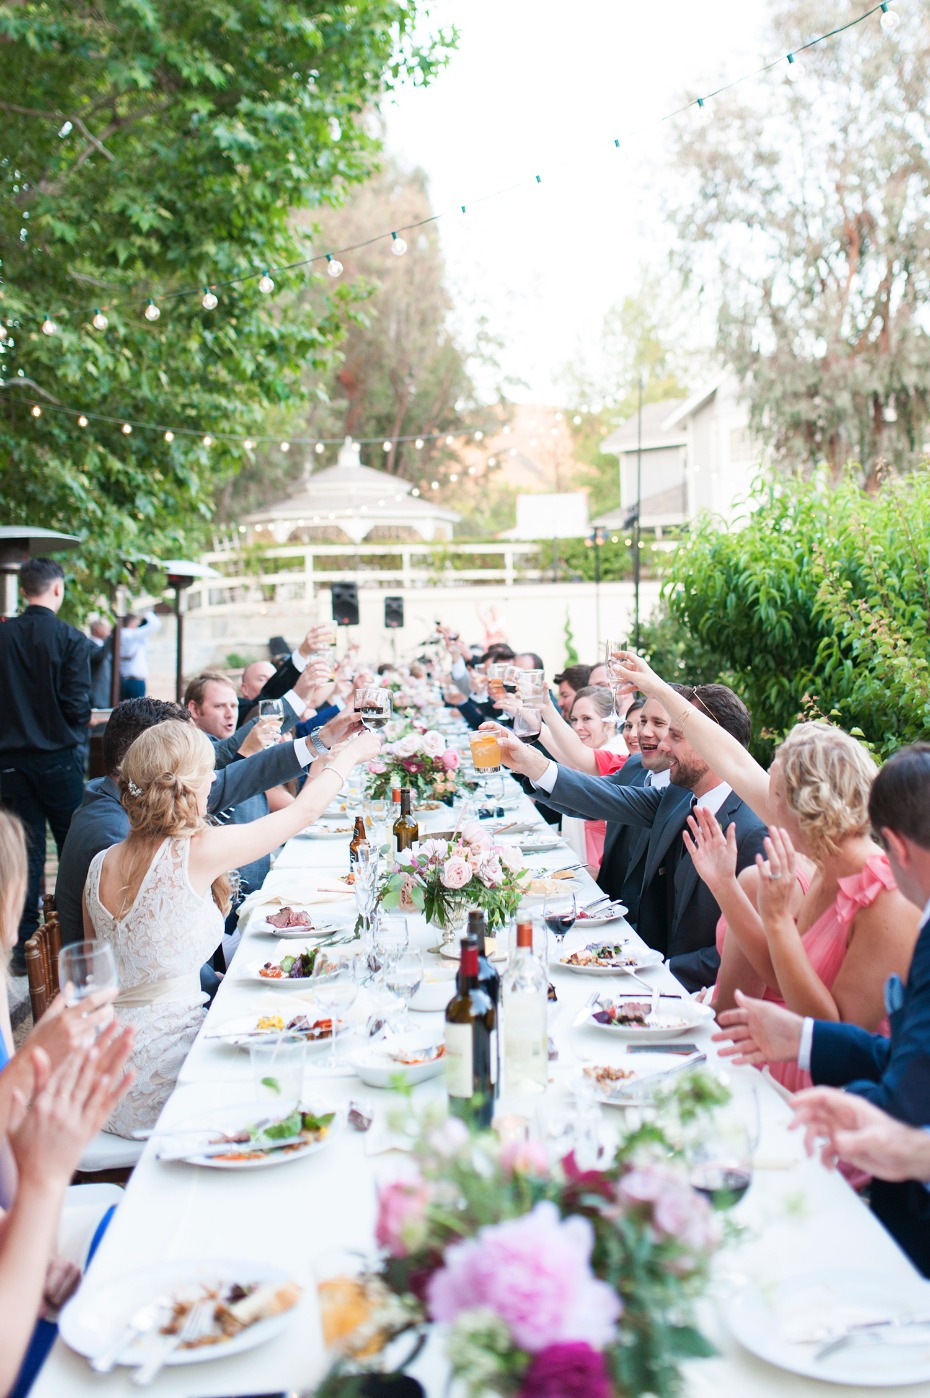 Toast to the newlyweds at this chic garden wedding